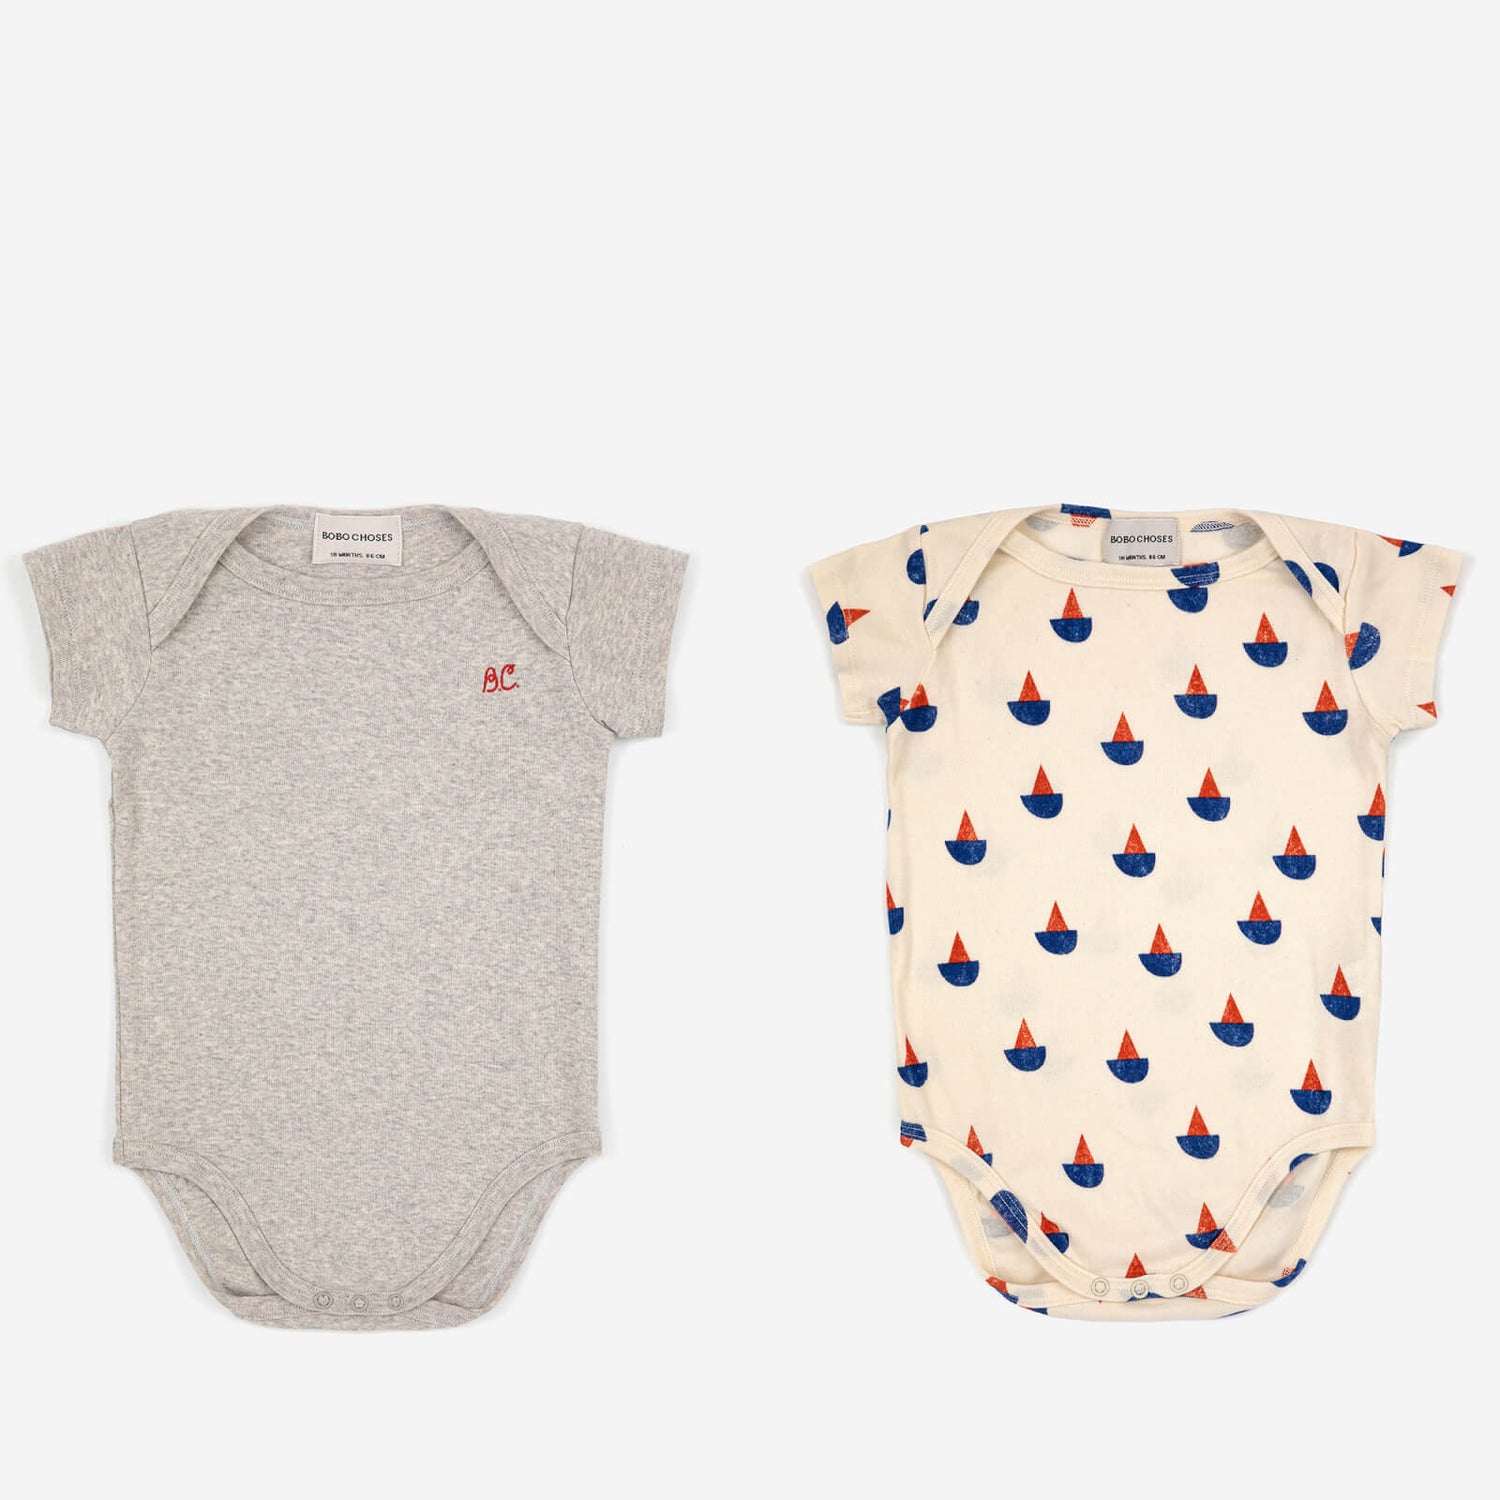 Bobo Choses Babys' Two-Pack Organic Cotton-Blend Babygrow - 3 Months